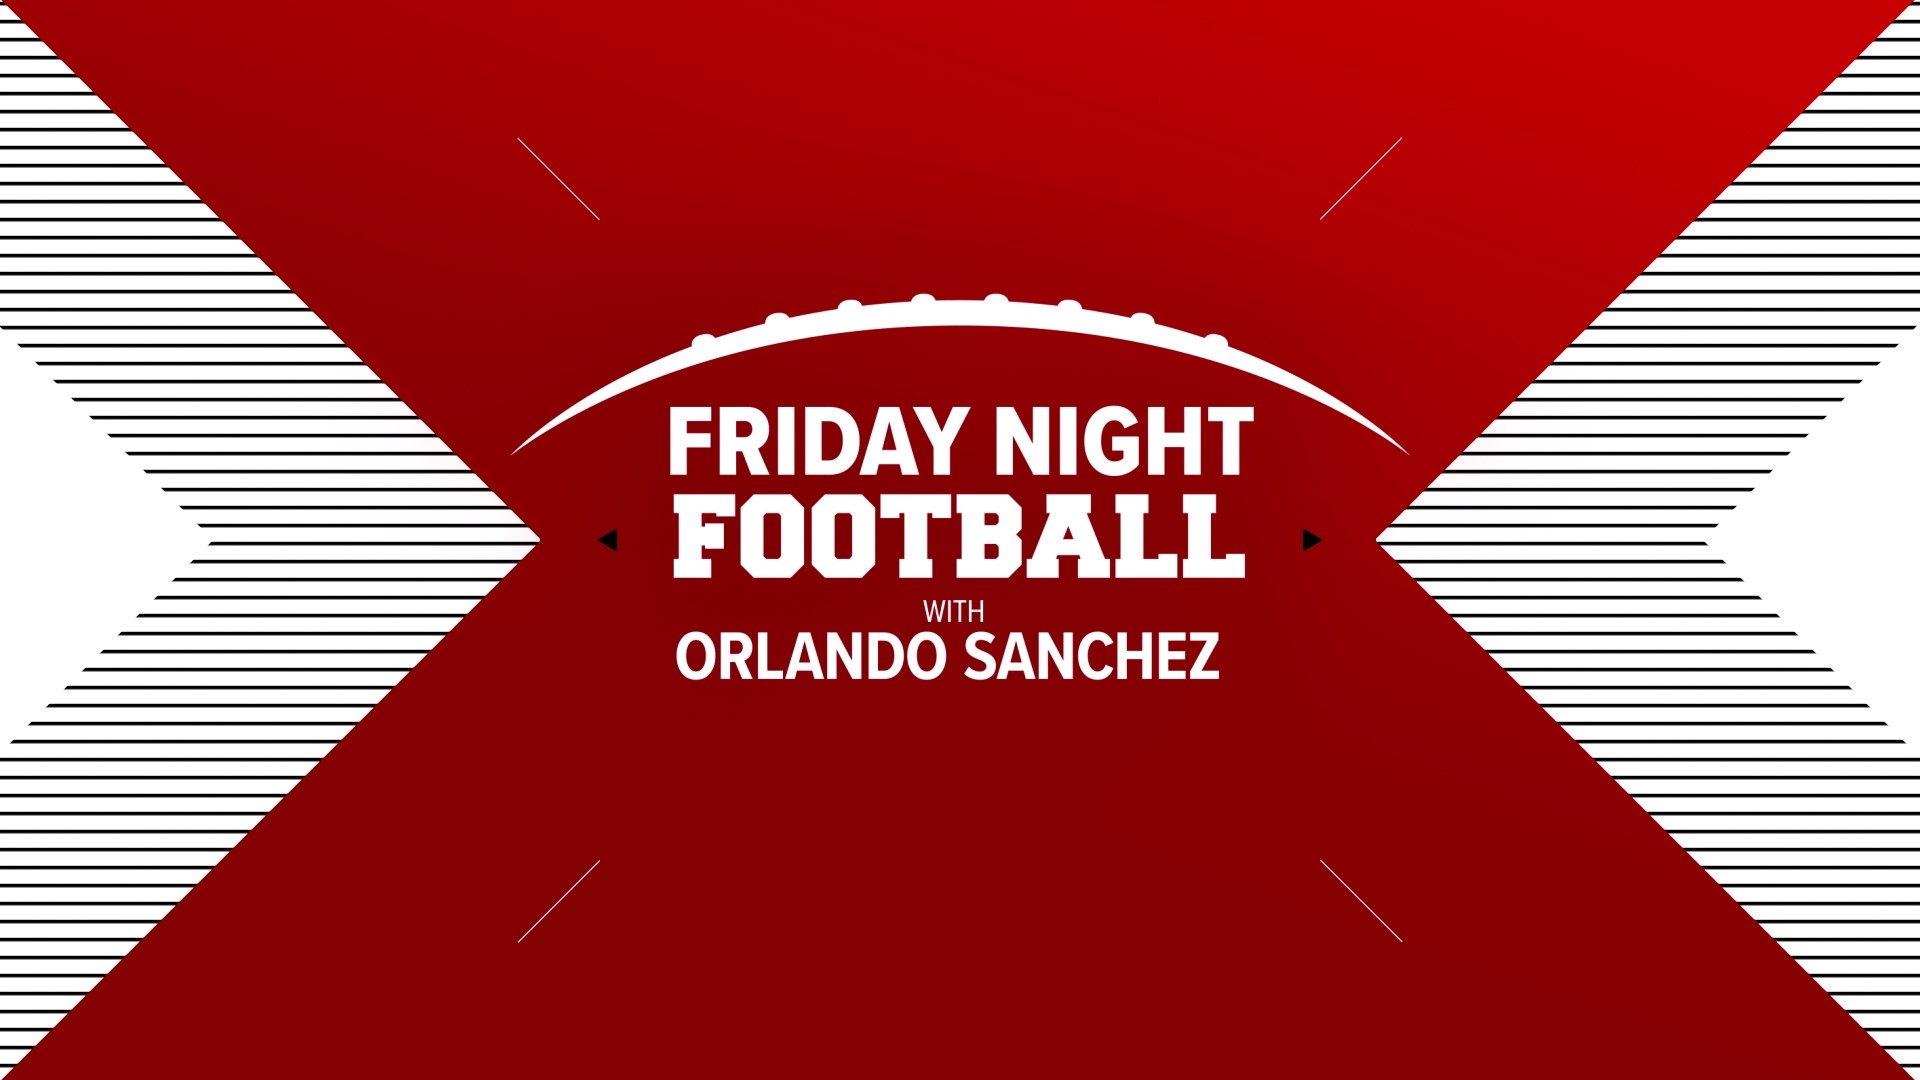 Friday Night Football with Orlando Sanchez, Art Edwards and the KGW sports team, covering high school football in the Portland Metro Area and Southwest Washington